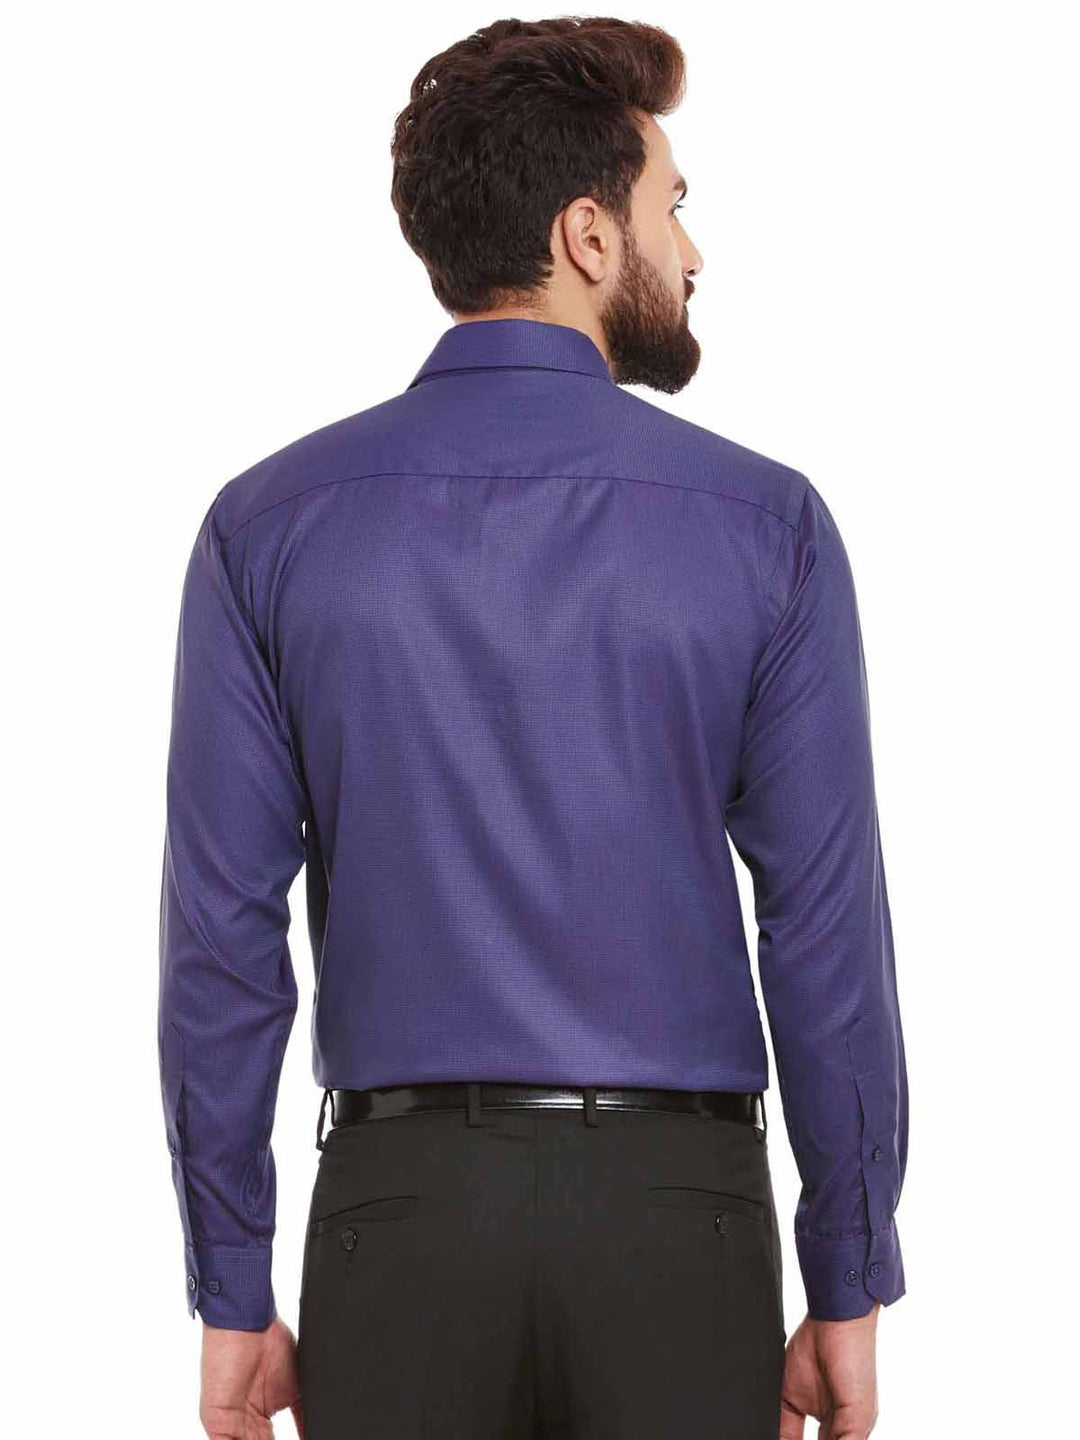 Men Navy and Purple Solid Slim Fit Formal Shirt